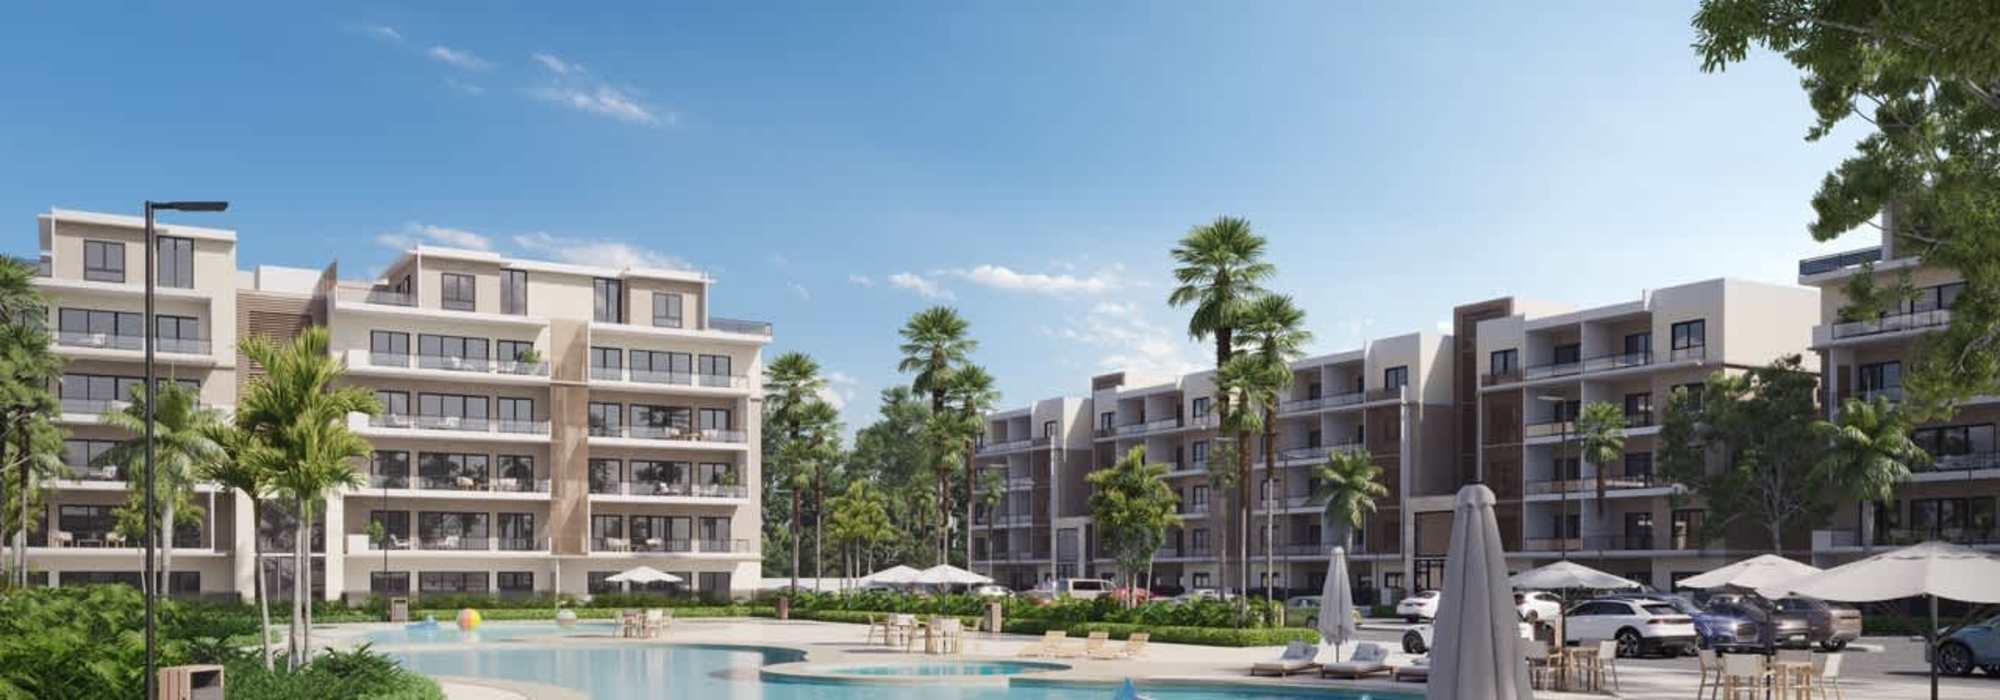 Invest in Project Lists p/2027 Front of Capcana c/Flexible Pagos